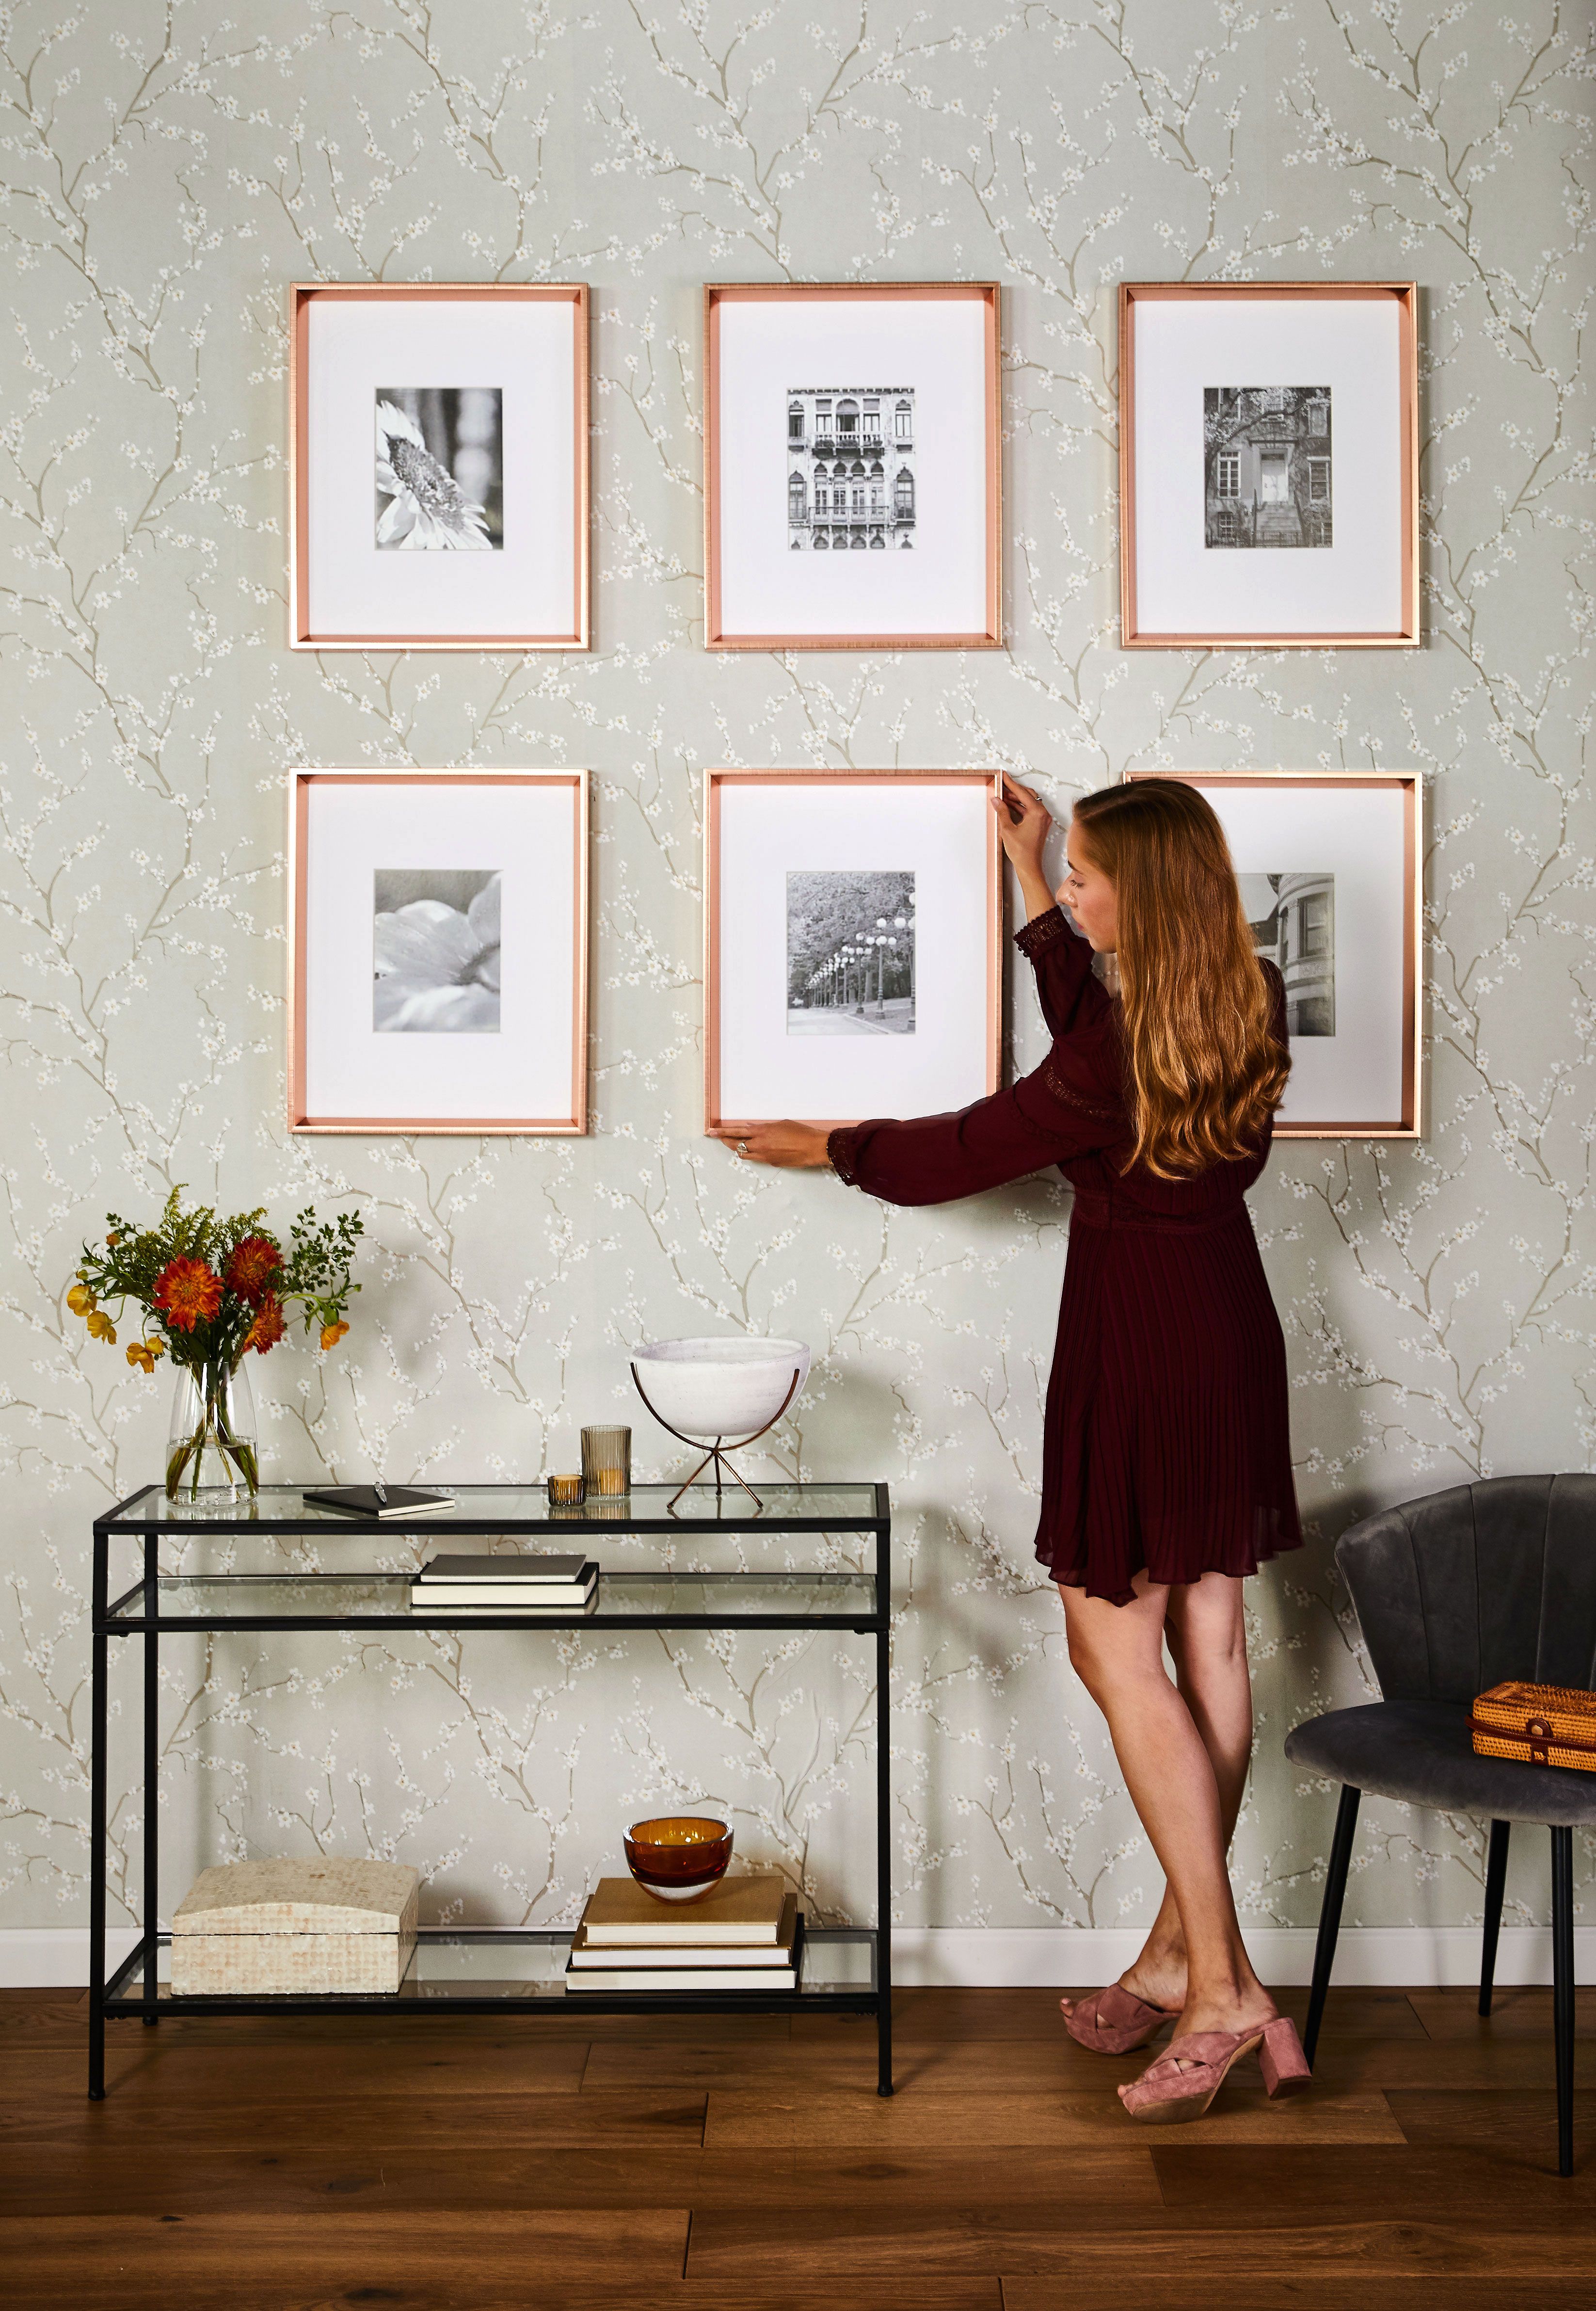 How To Create A Photo Wall To Display Your Family Photos In Style - Guiding  Home | Display family photos, Home decor, Home deco